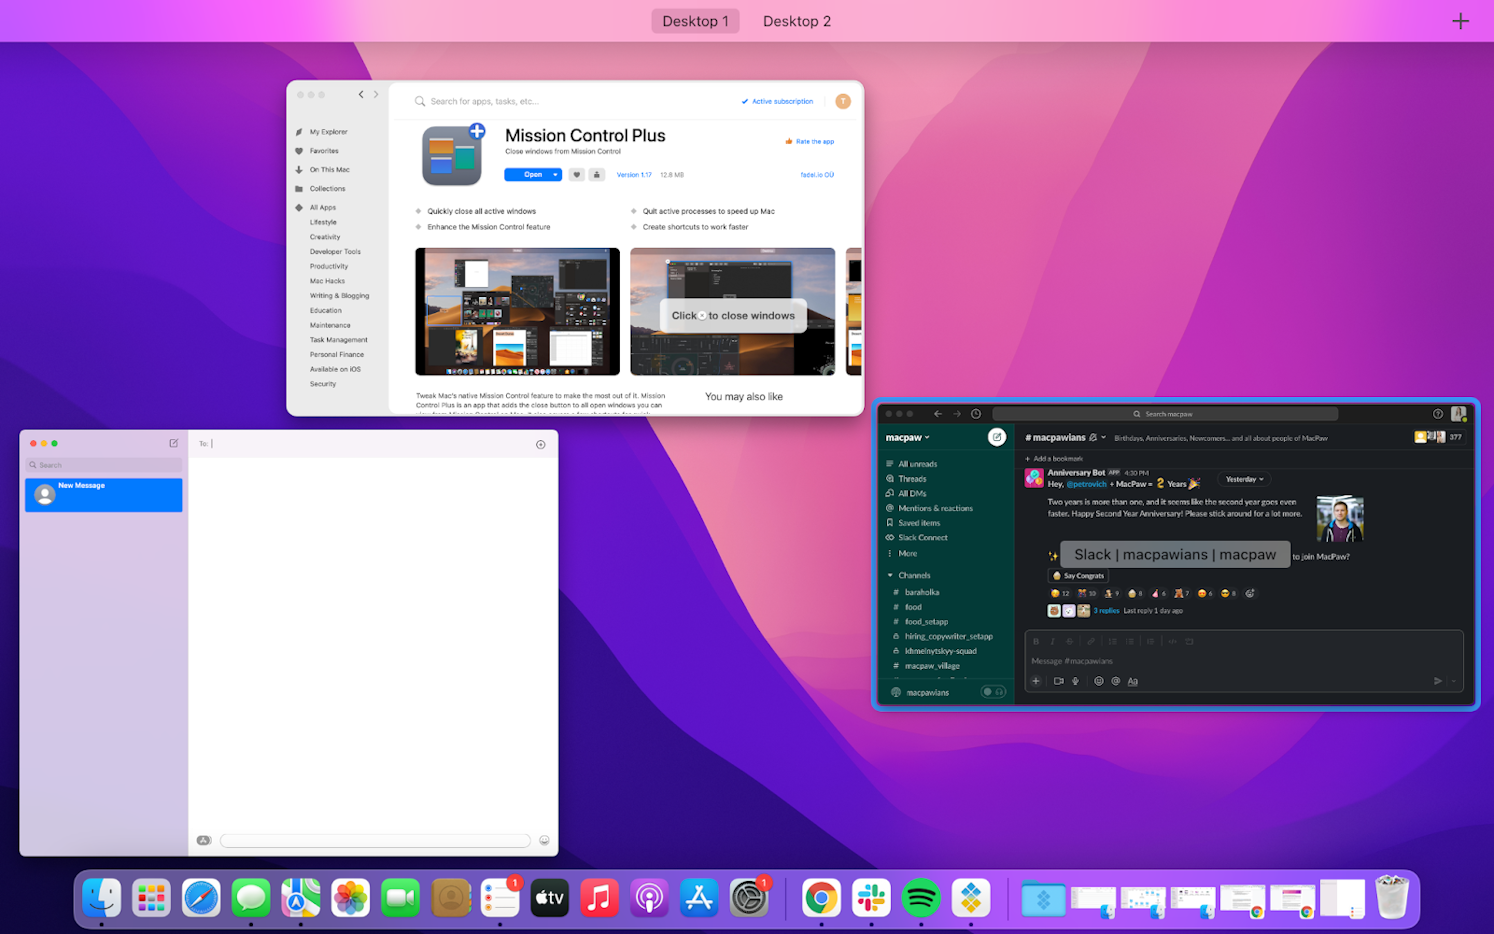 How to use multiple desktops on Mac